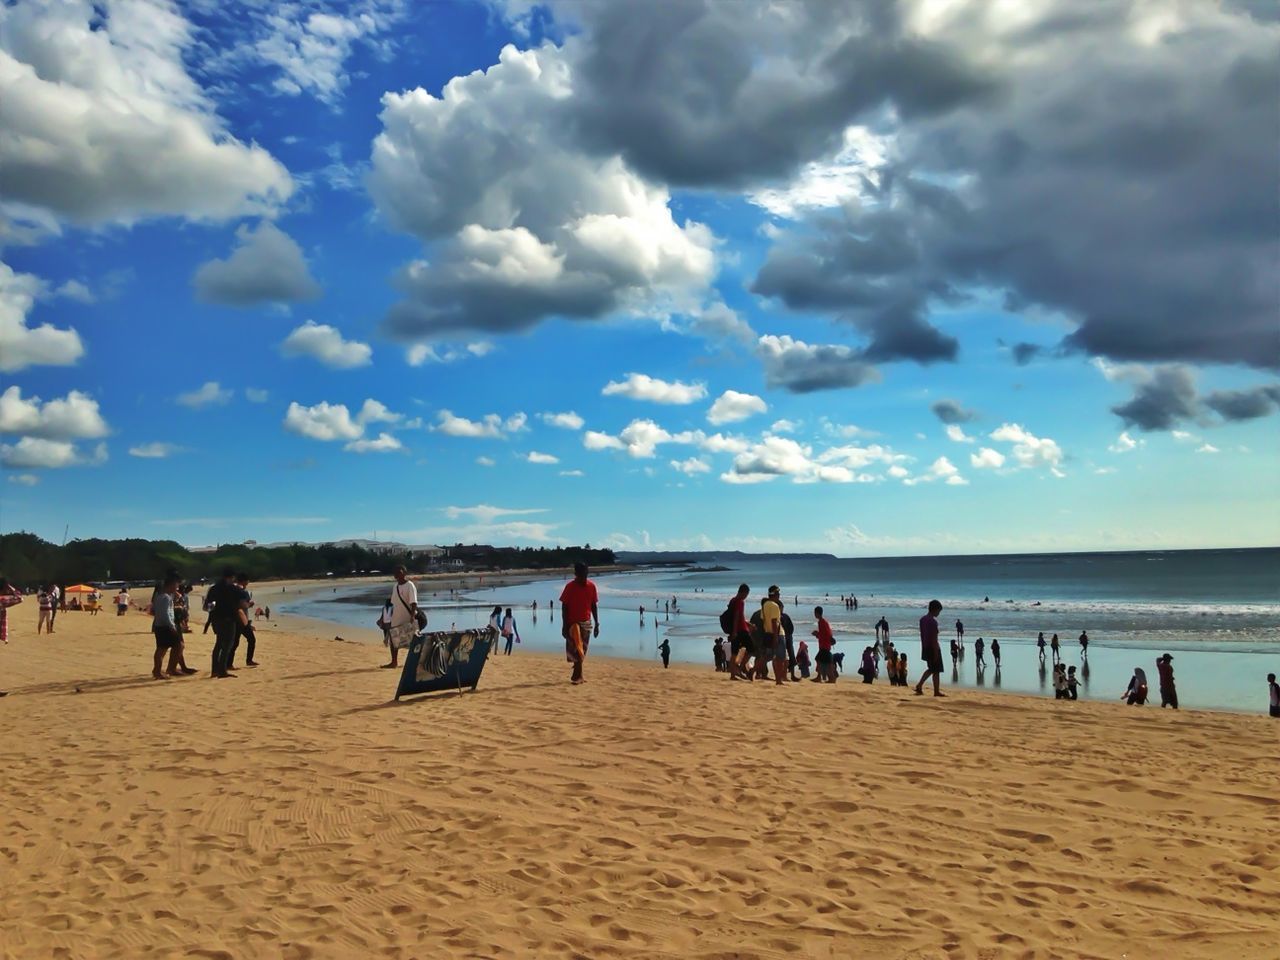 beach, sea, large group of people, water, sky, sand, horizon over water, shore, vacations, cloud - sky, leisure activity, lifestyles, mixed age range, scenics, person, cloud, men, beauty in nature, tranquil scene